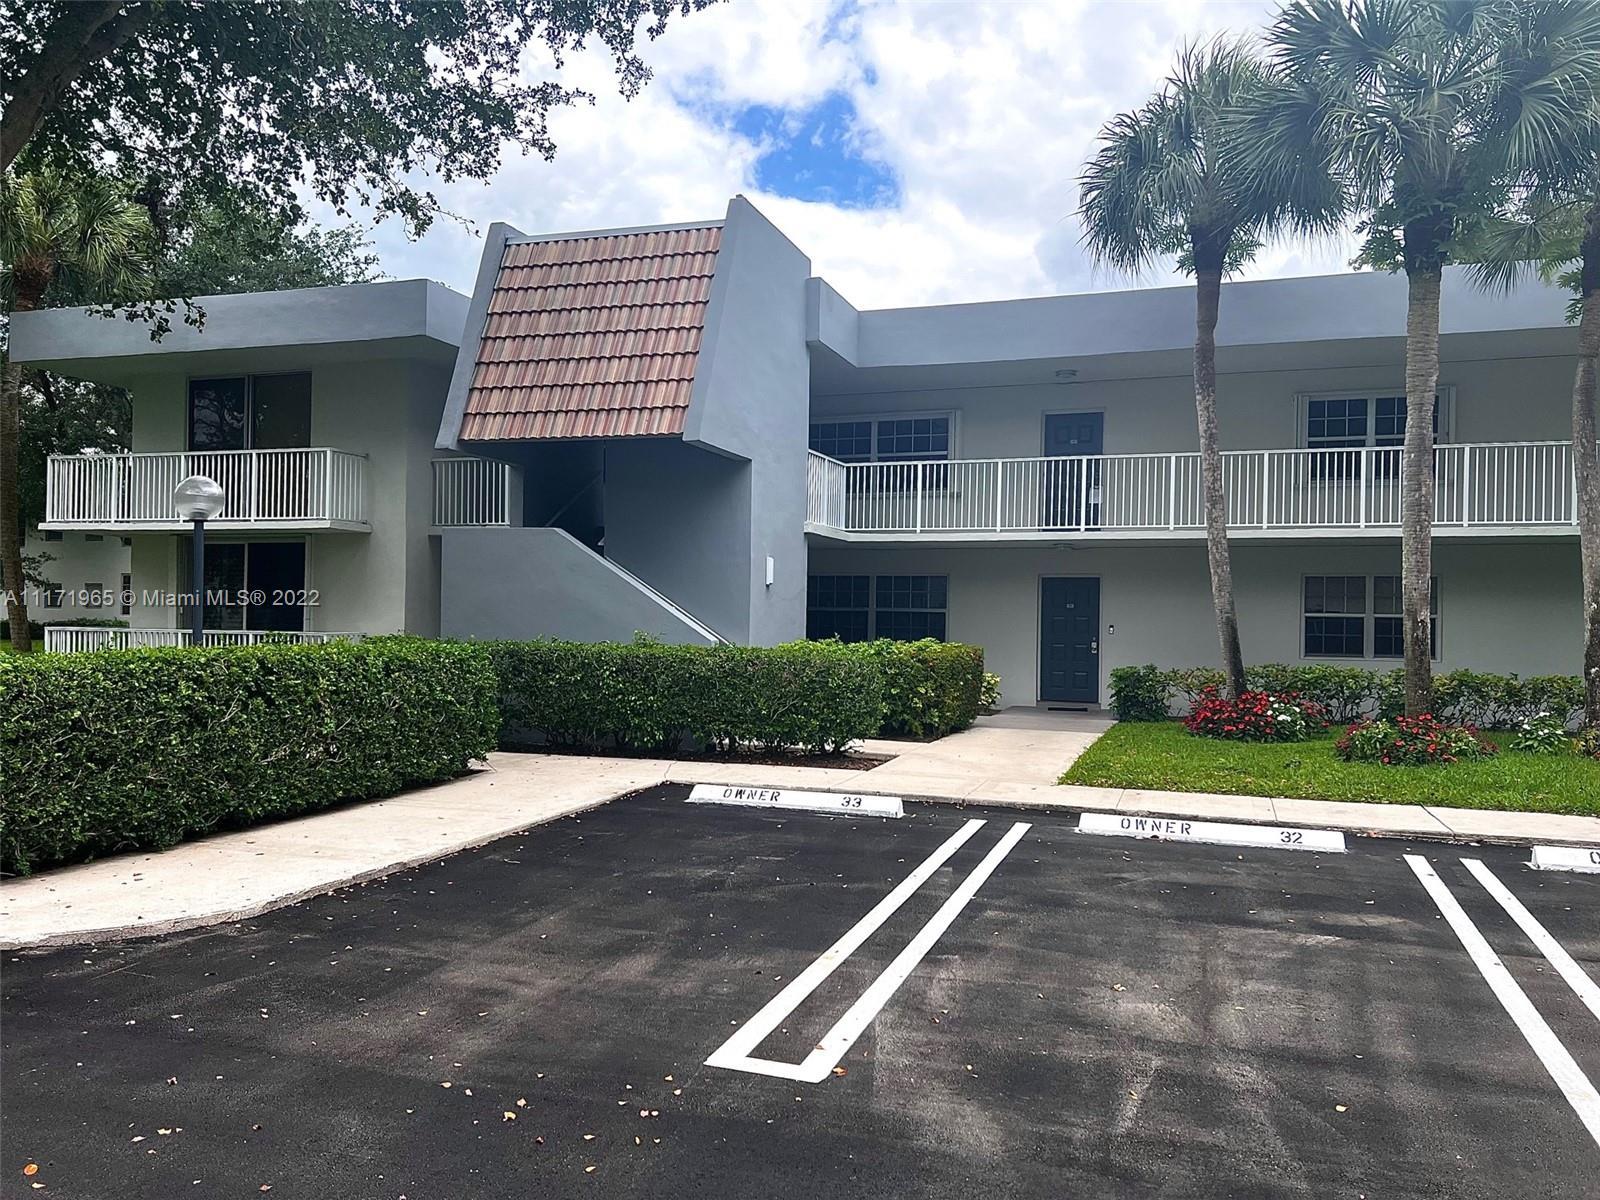 Huge Lake Front Apartment located in the wonderful secluded community at Palm Aire. This 3 BEDROOM/ 